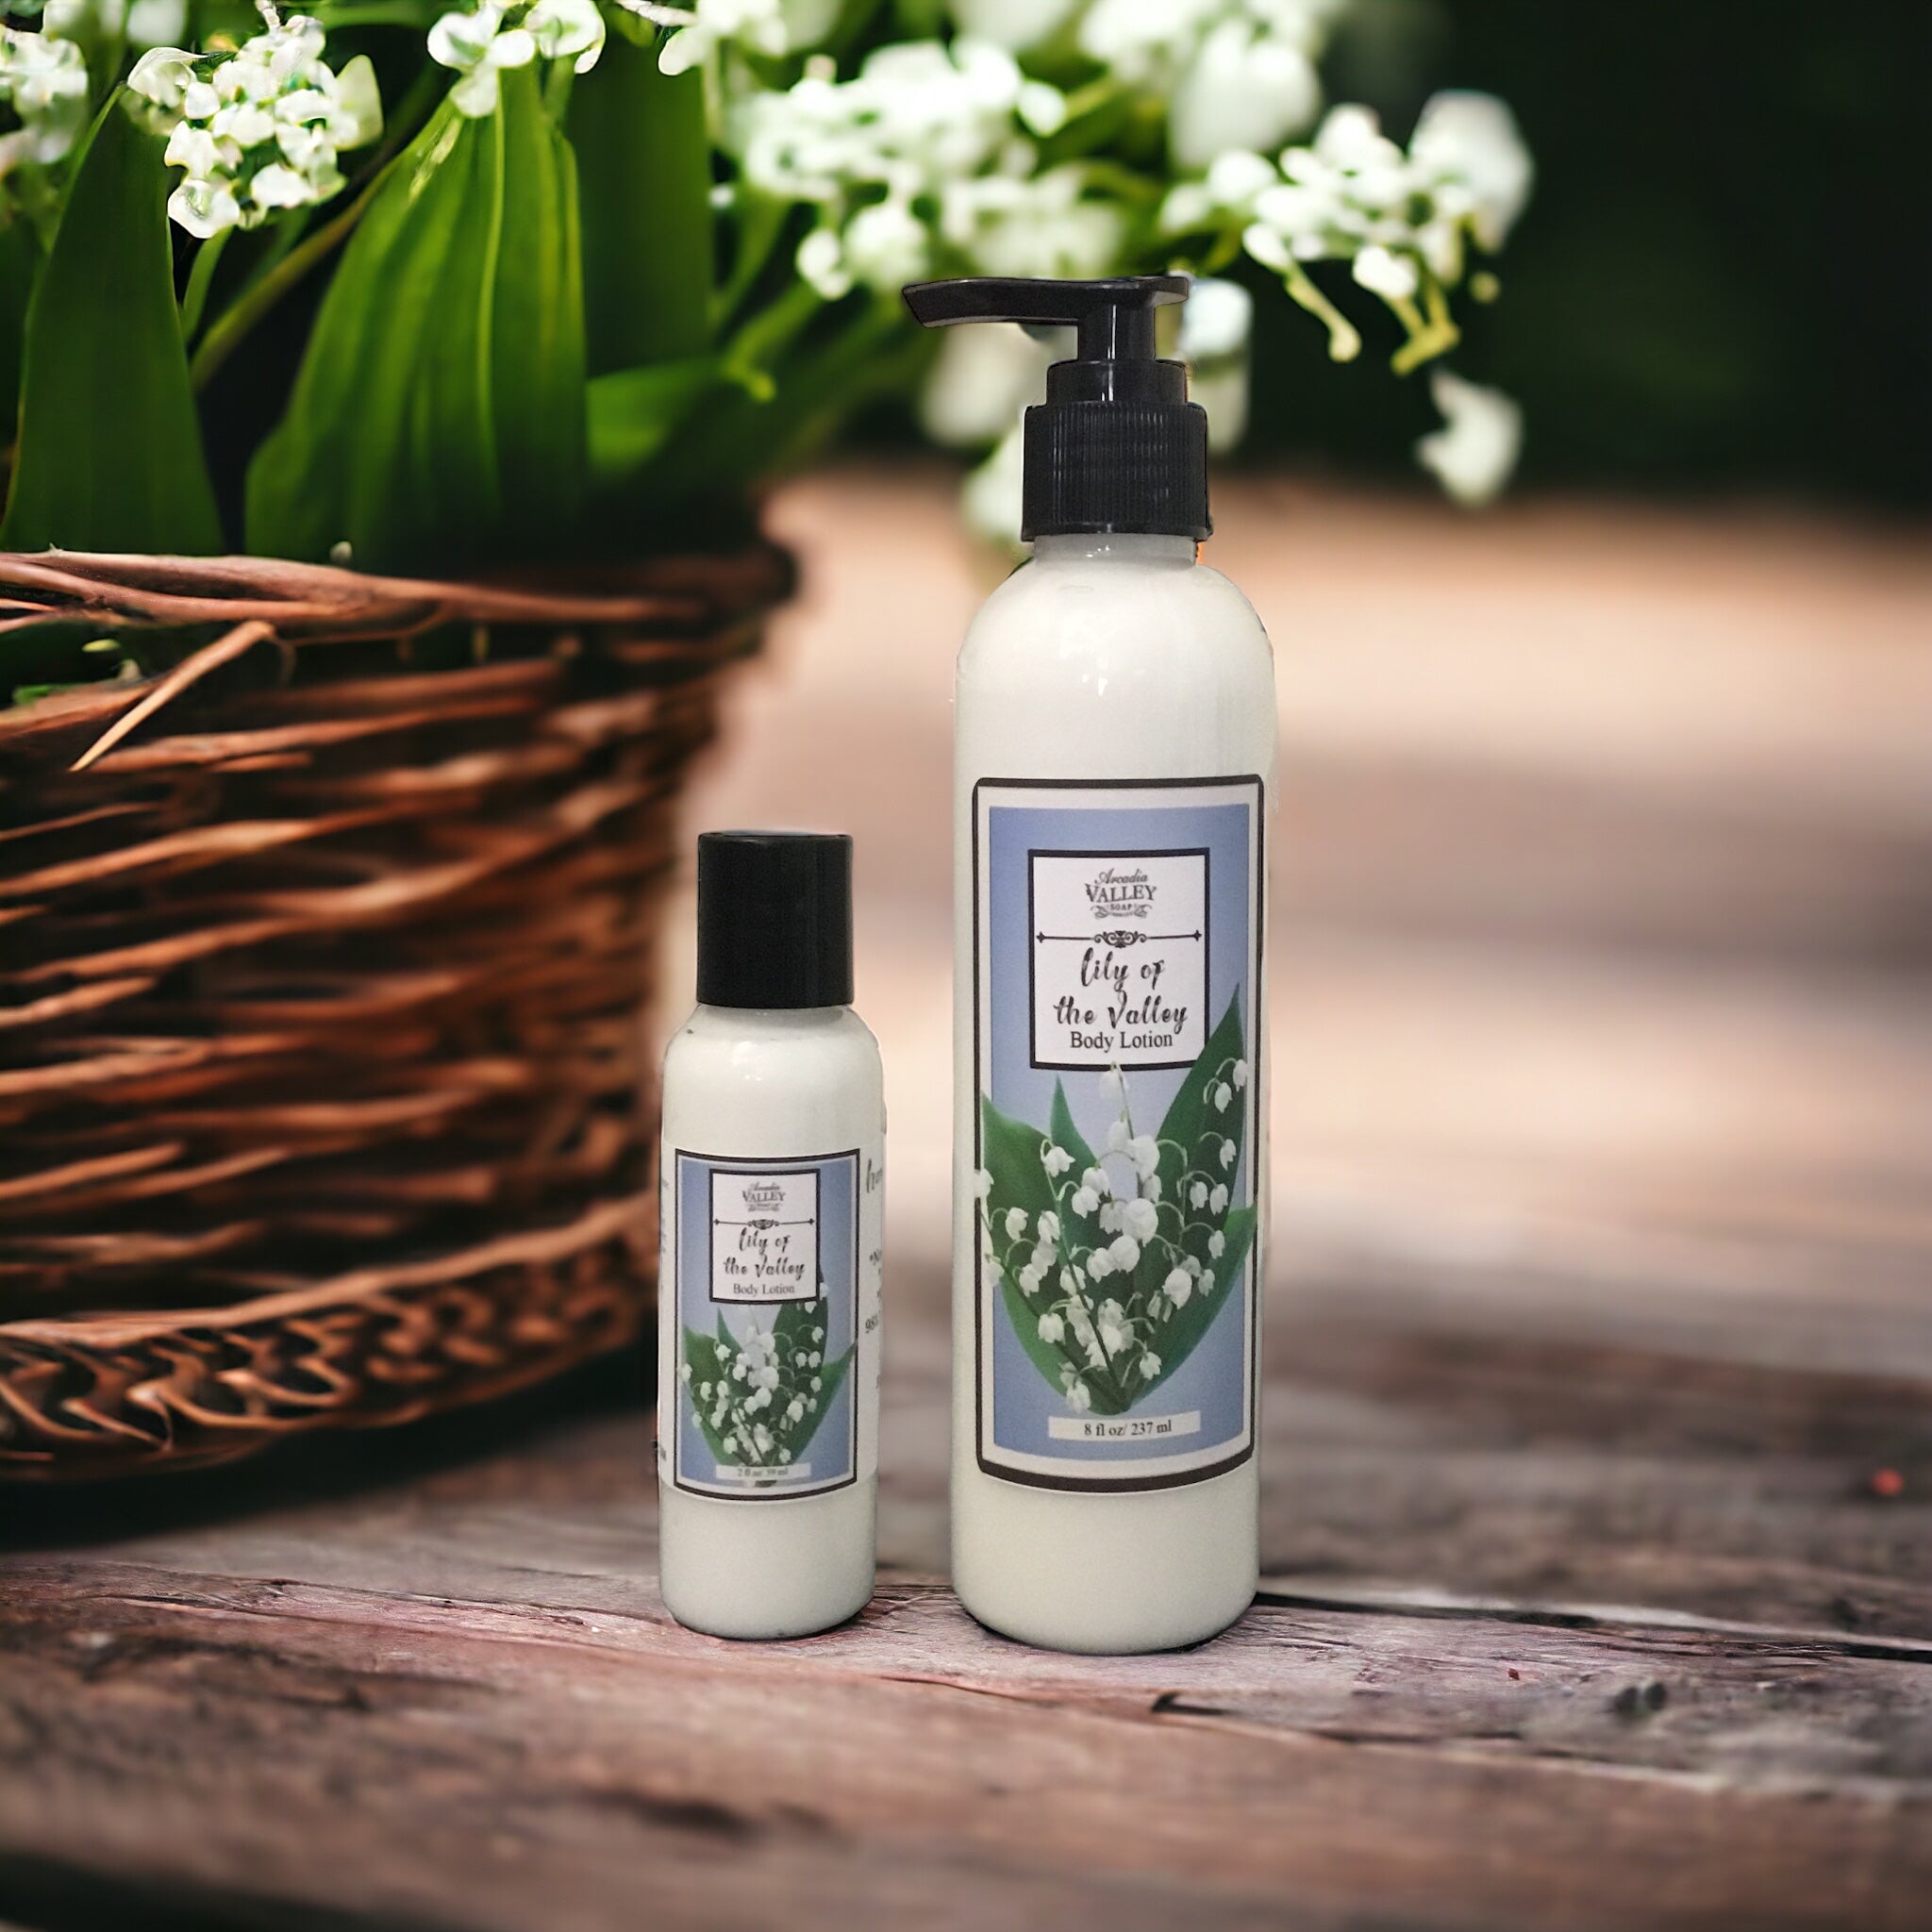 Lily of the Valley Body Lotion